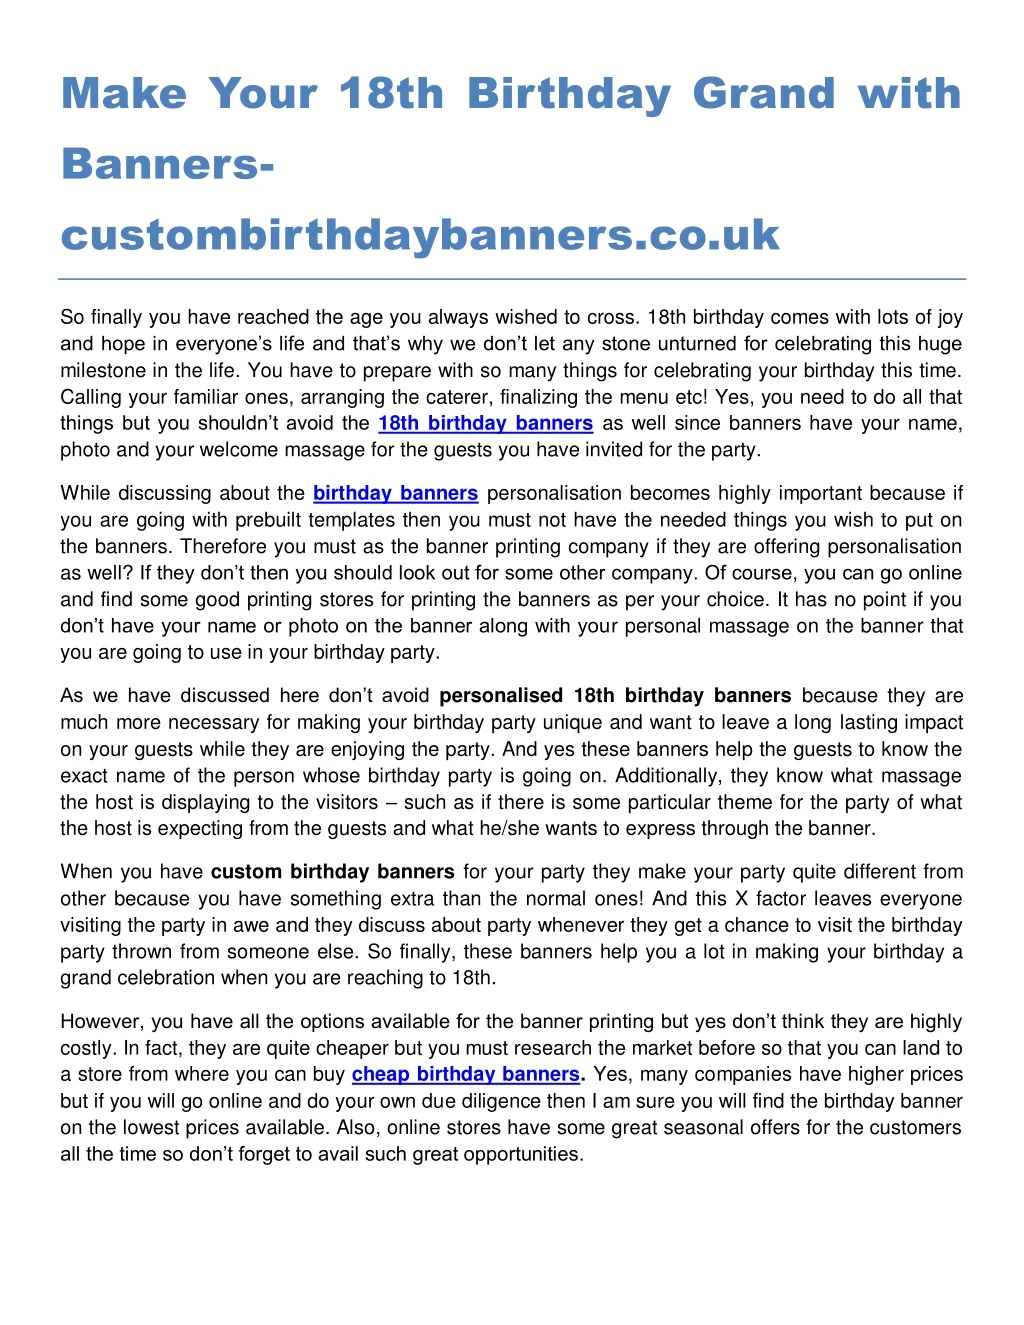 make your 18th birthday grand with banners